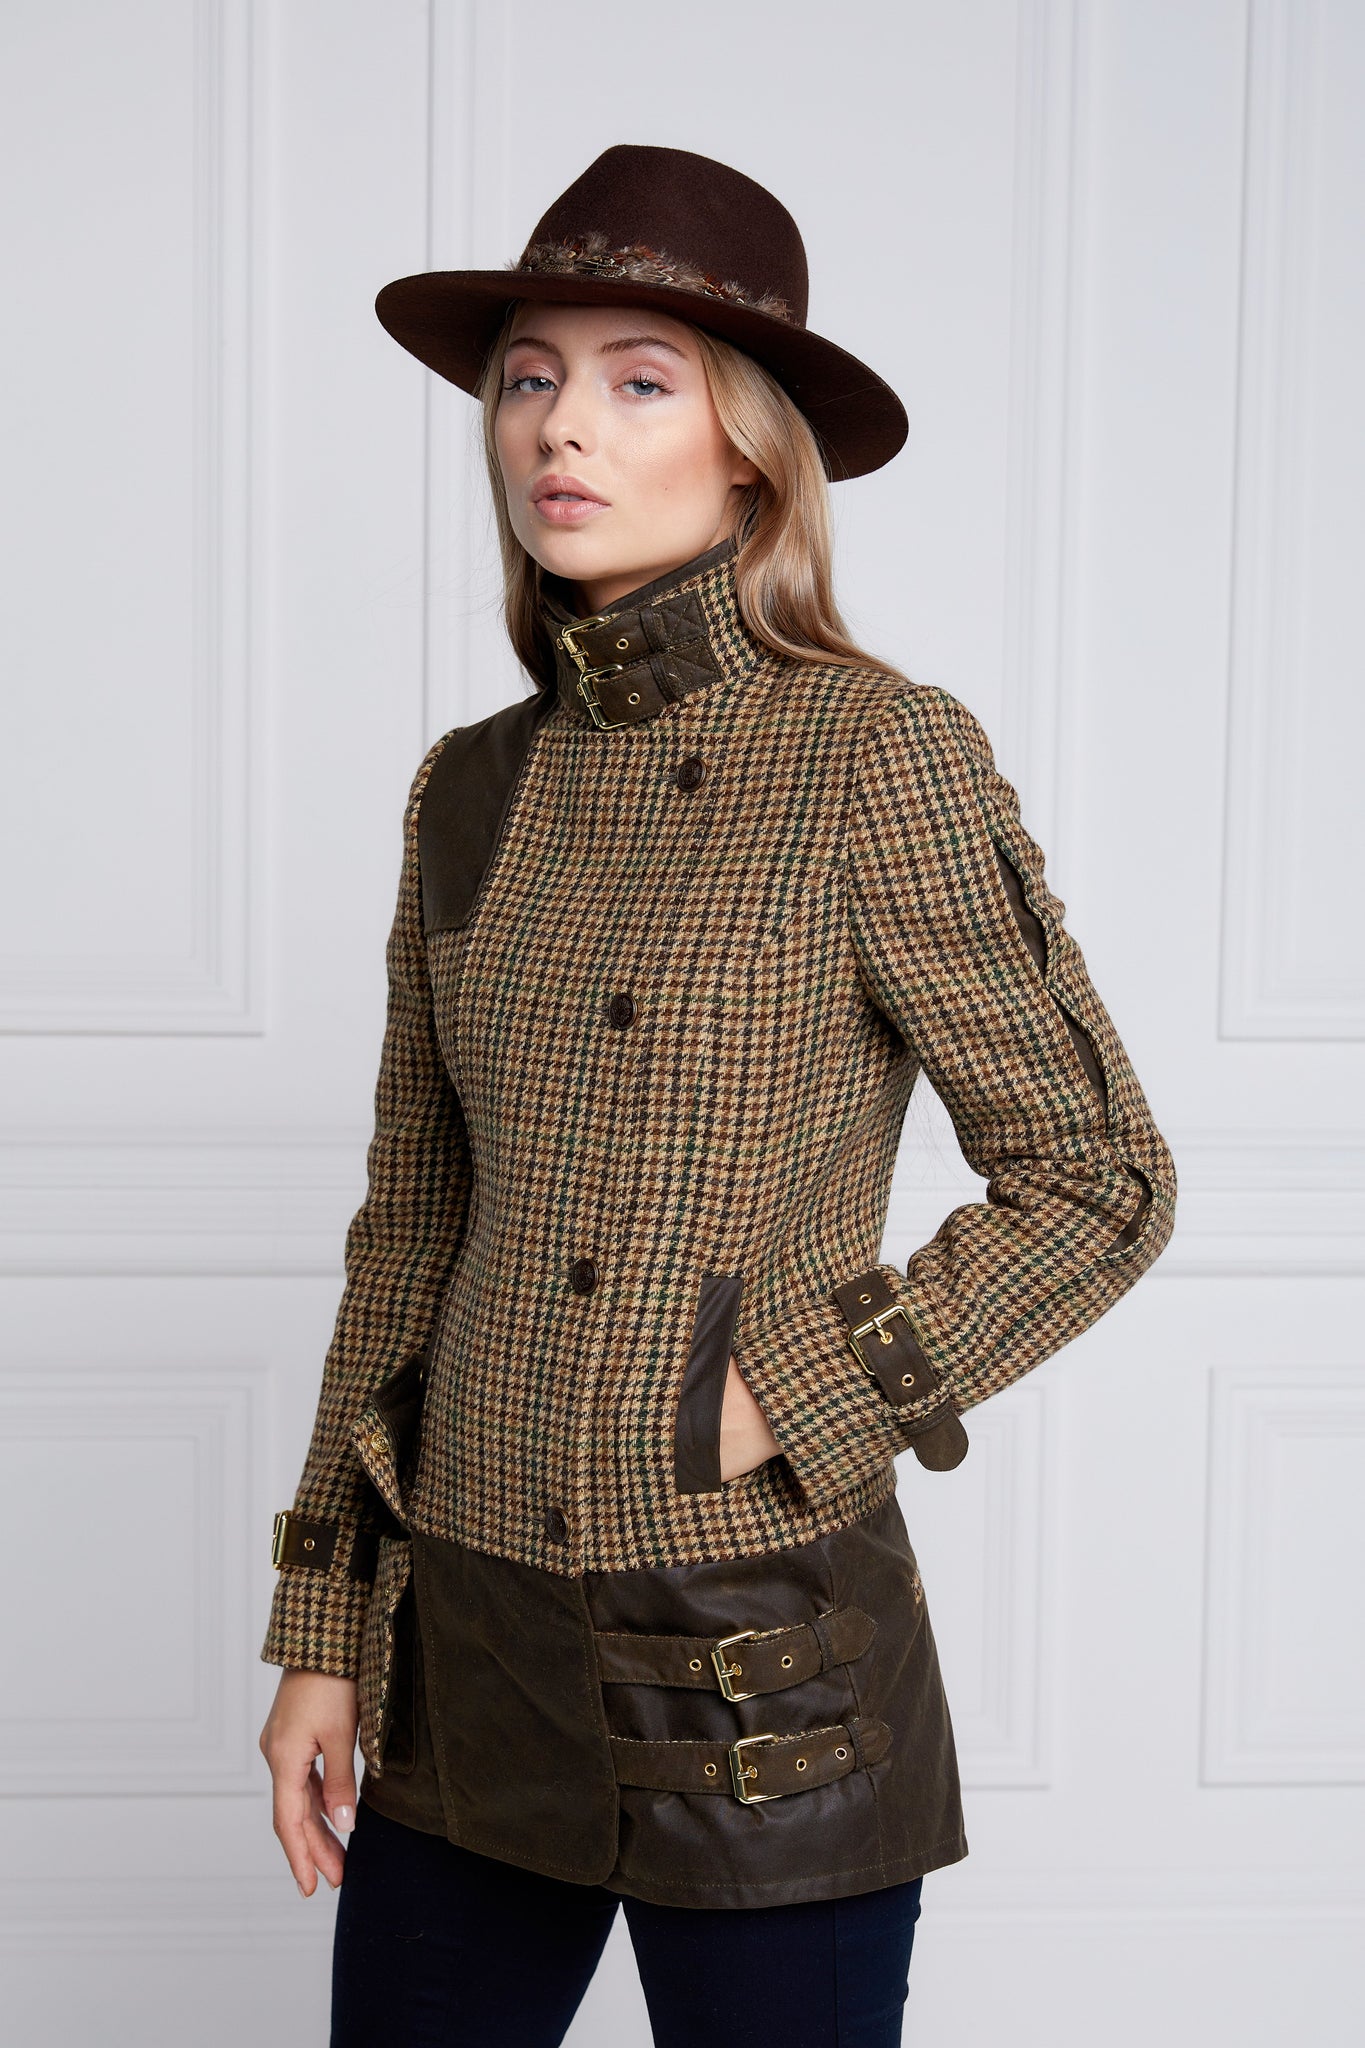 womens fitted field jacket in stone brown and green houndstooth tweed trimmed with contrast chocolate Millerain Wax fabric on shoulder across back and on the hip finished with horn button fastenings an buckles on the collar cuffs and hip